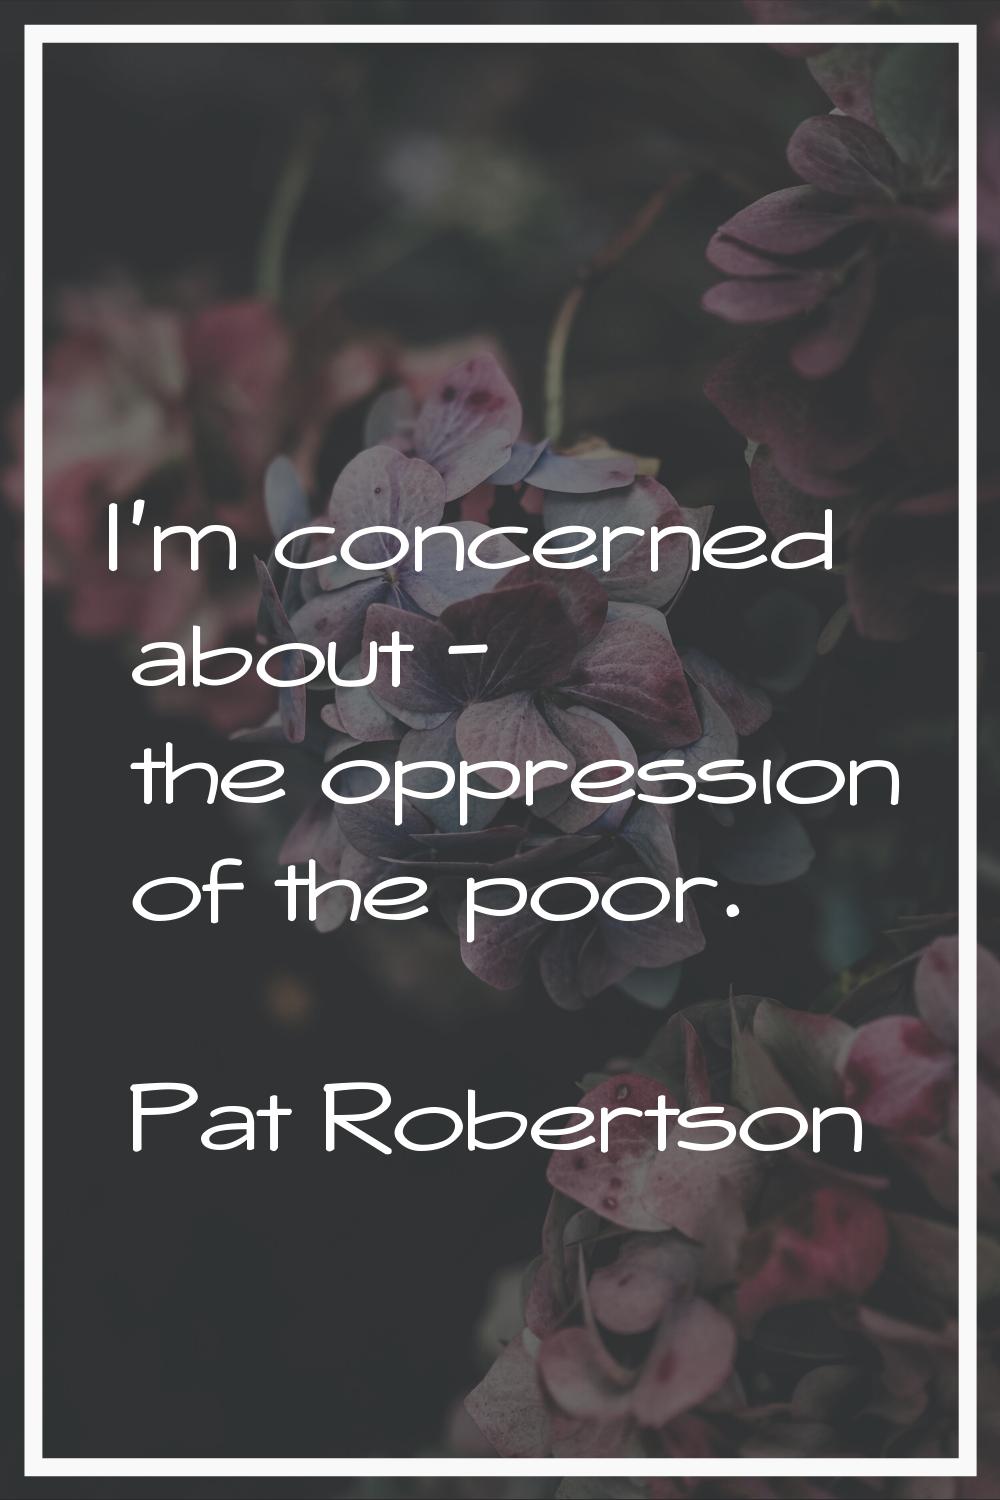 I'm concerned about - the oppression of the poor.